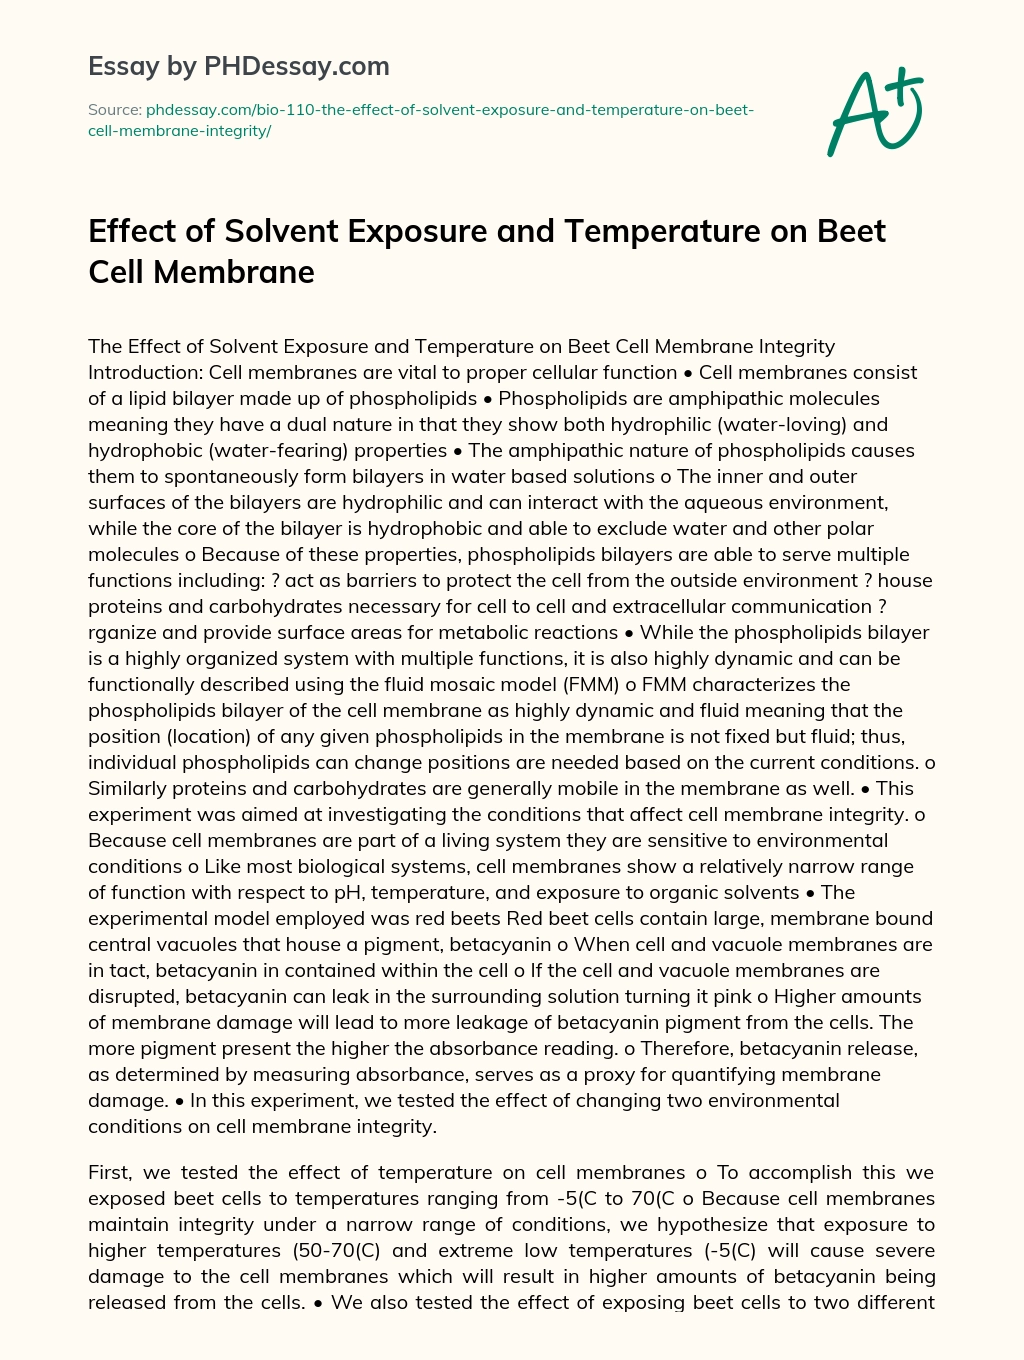 Effect of Solvent Exposure and Temperature on Beet Cell Membrane essay